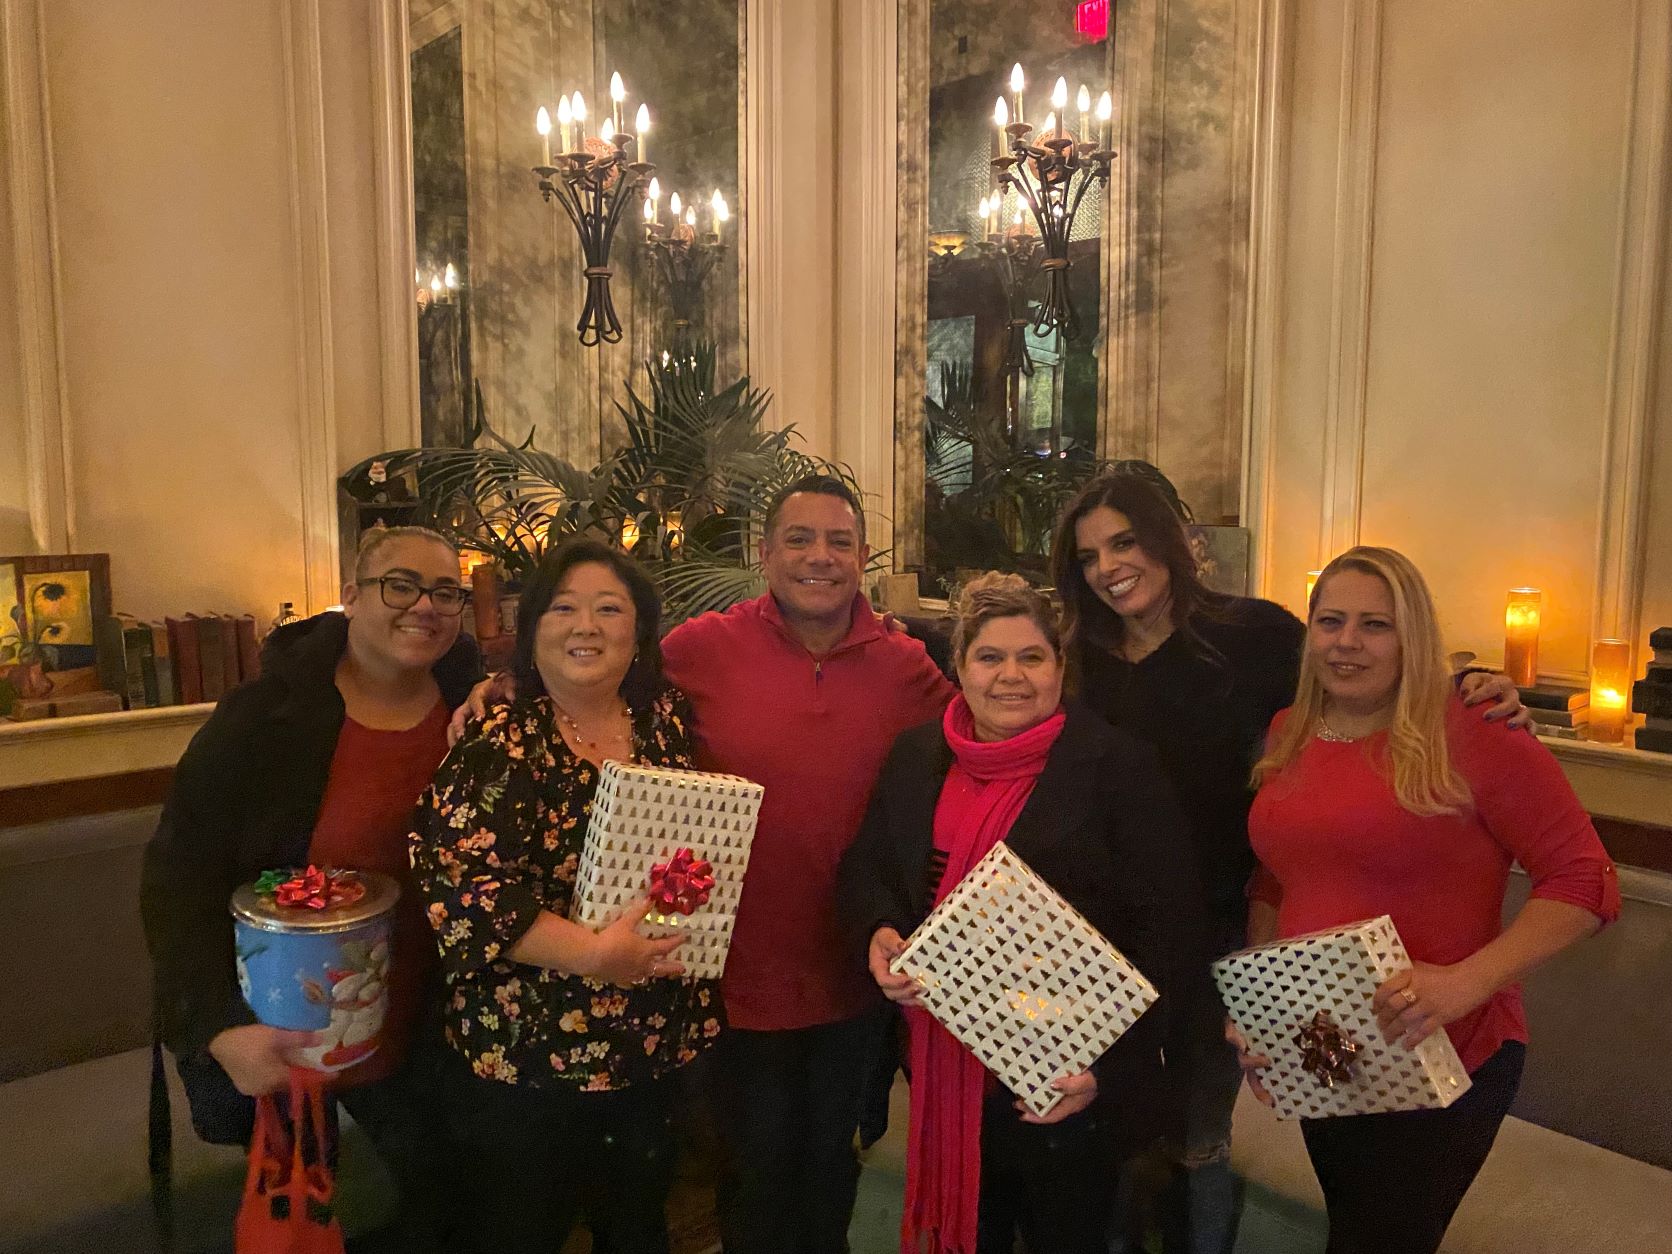 One of our favorite times of the year is celebrating our Caregivers during the Holidays. So appreciative of all their efforts.  Rockstars for sure!